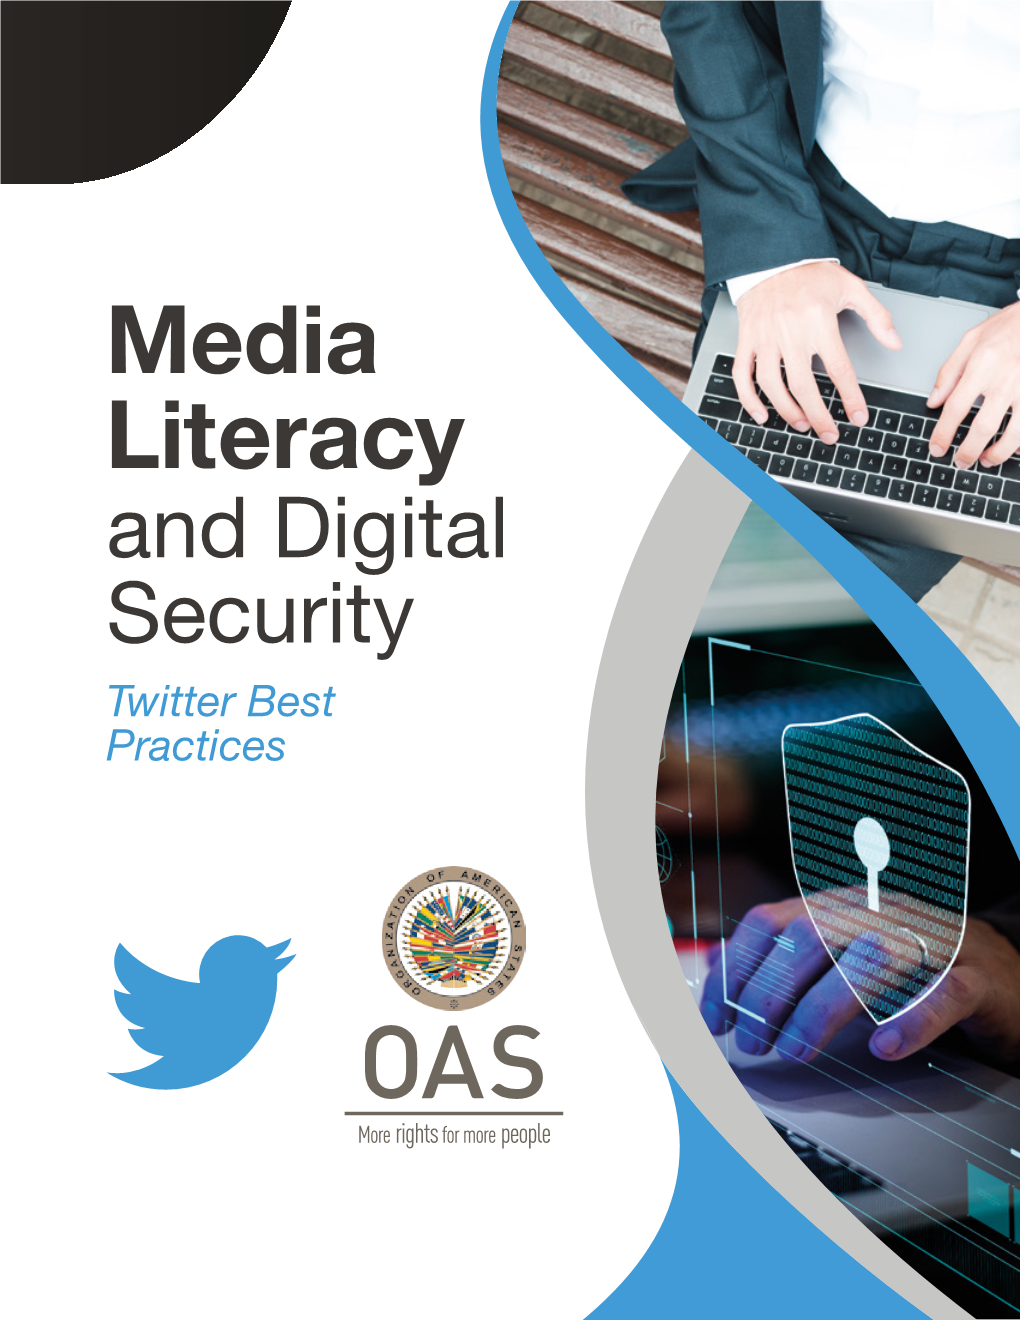 Media Literacy and Digital Security Twitter Best Practices